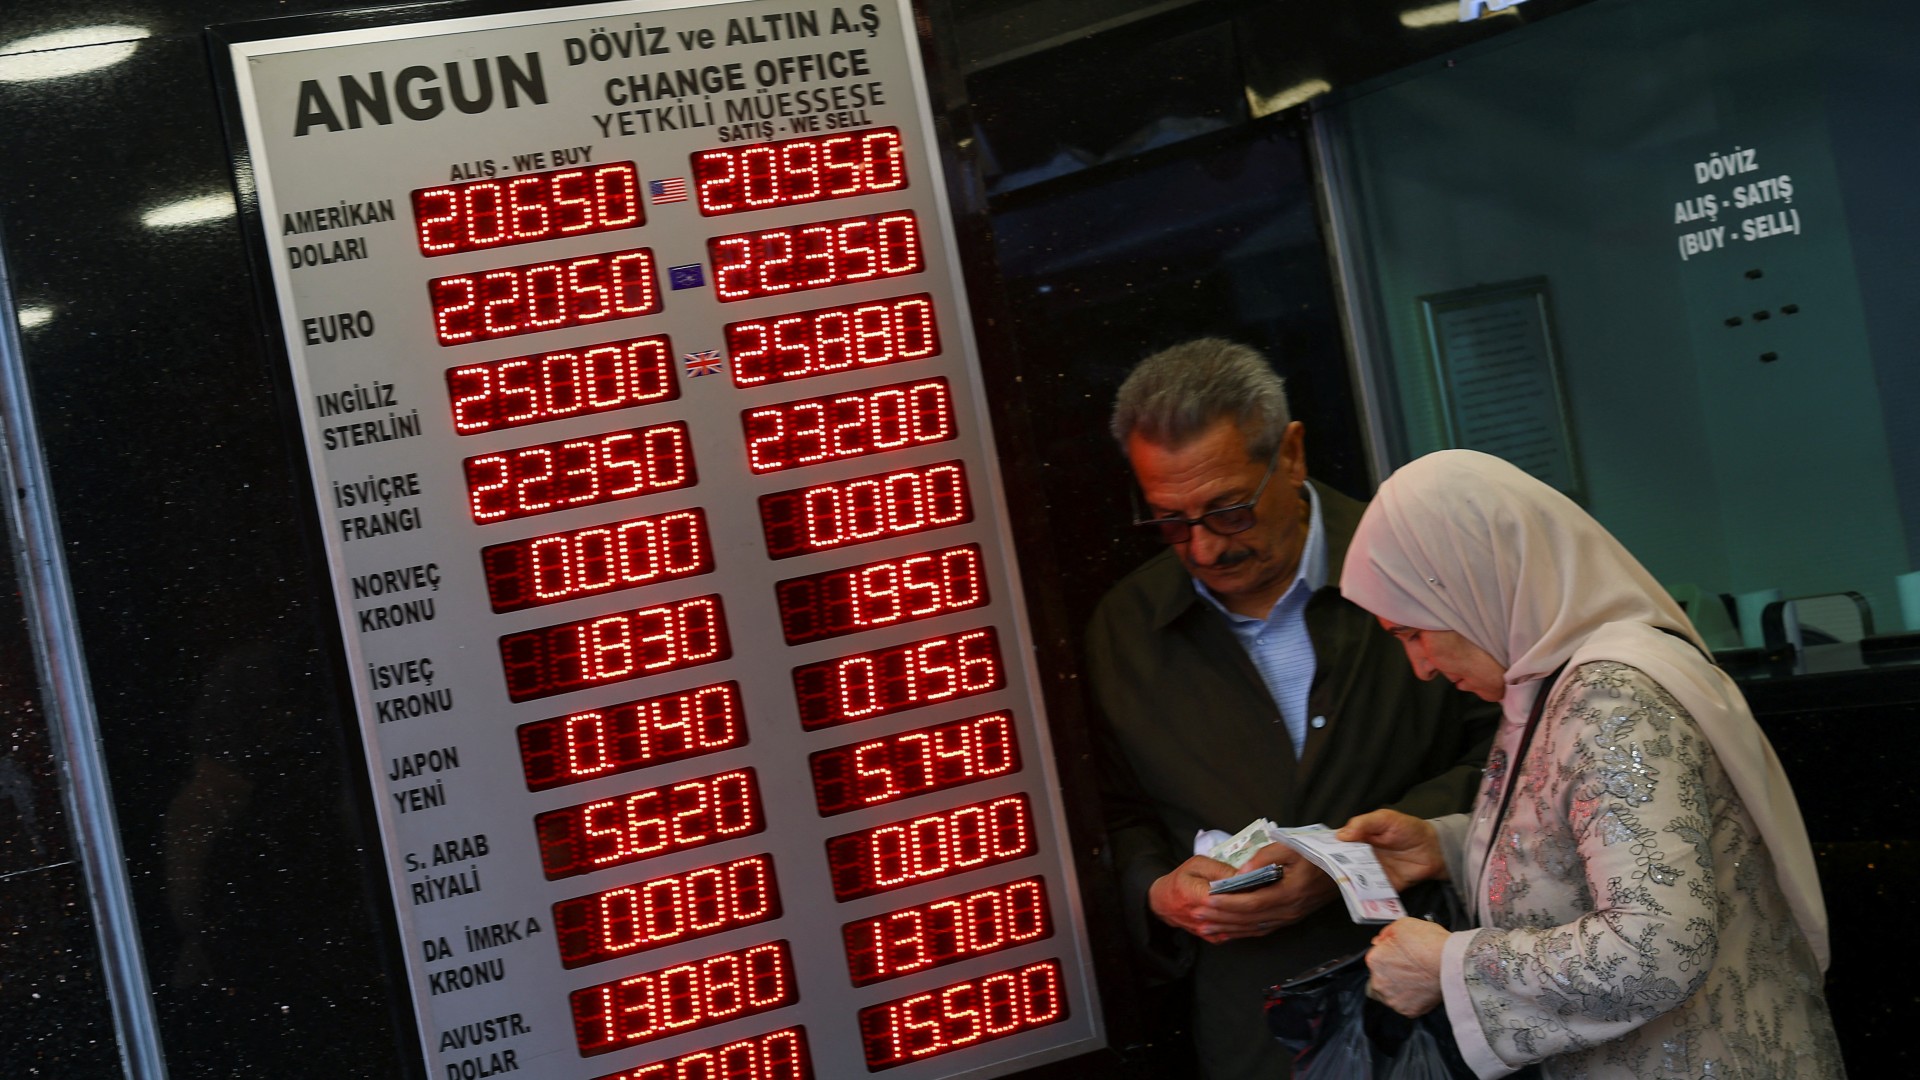 People visit a currency exchange office, after Turkish President Recep Tayyip Erdogan was declared the winner in the second round of the presidential election, in Istanbul, on 29 May (Reuters)